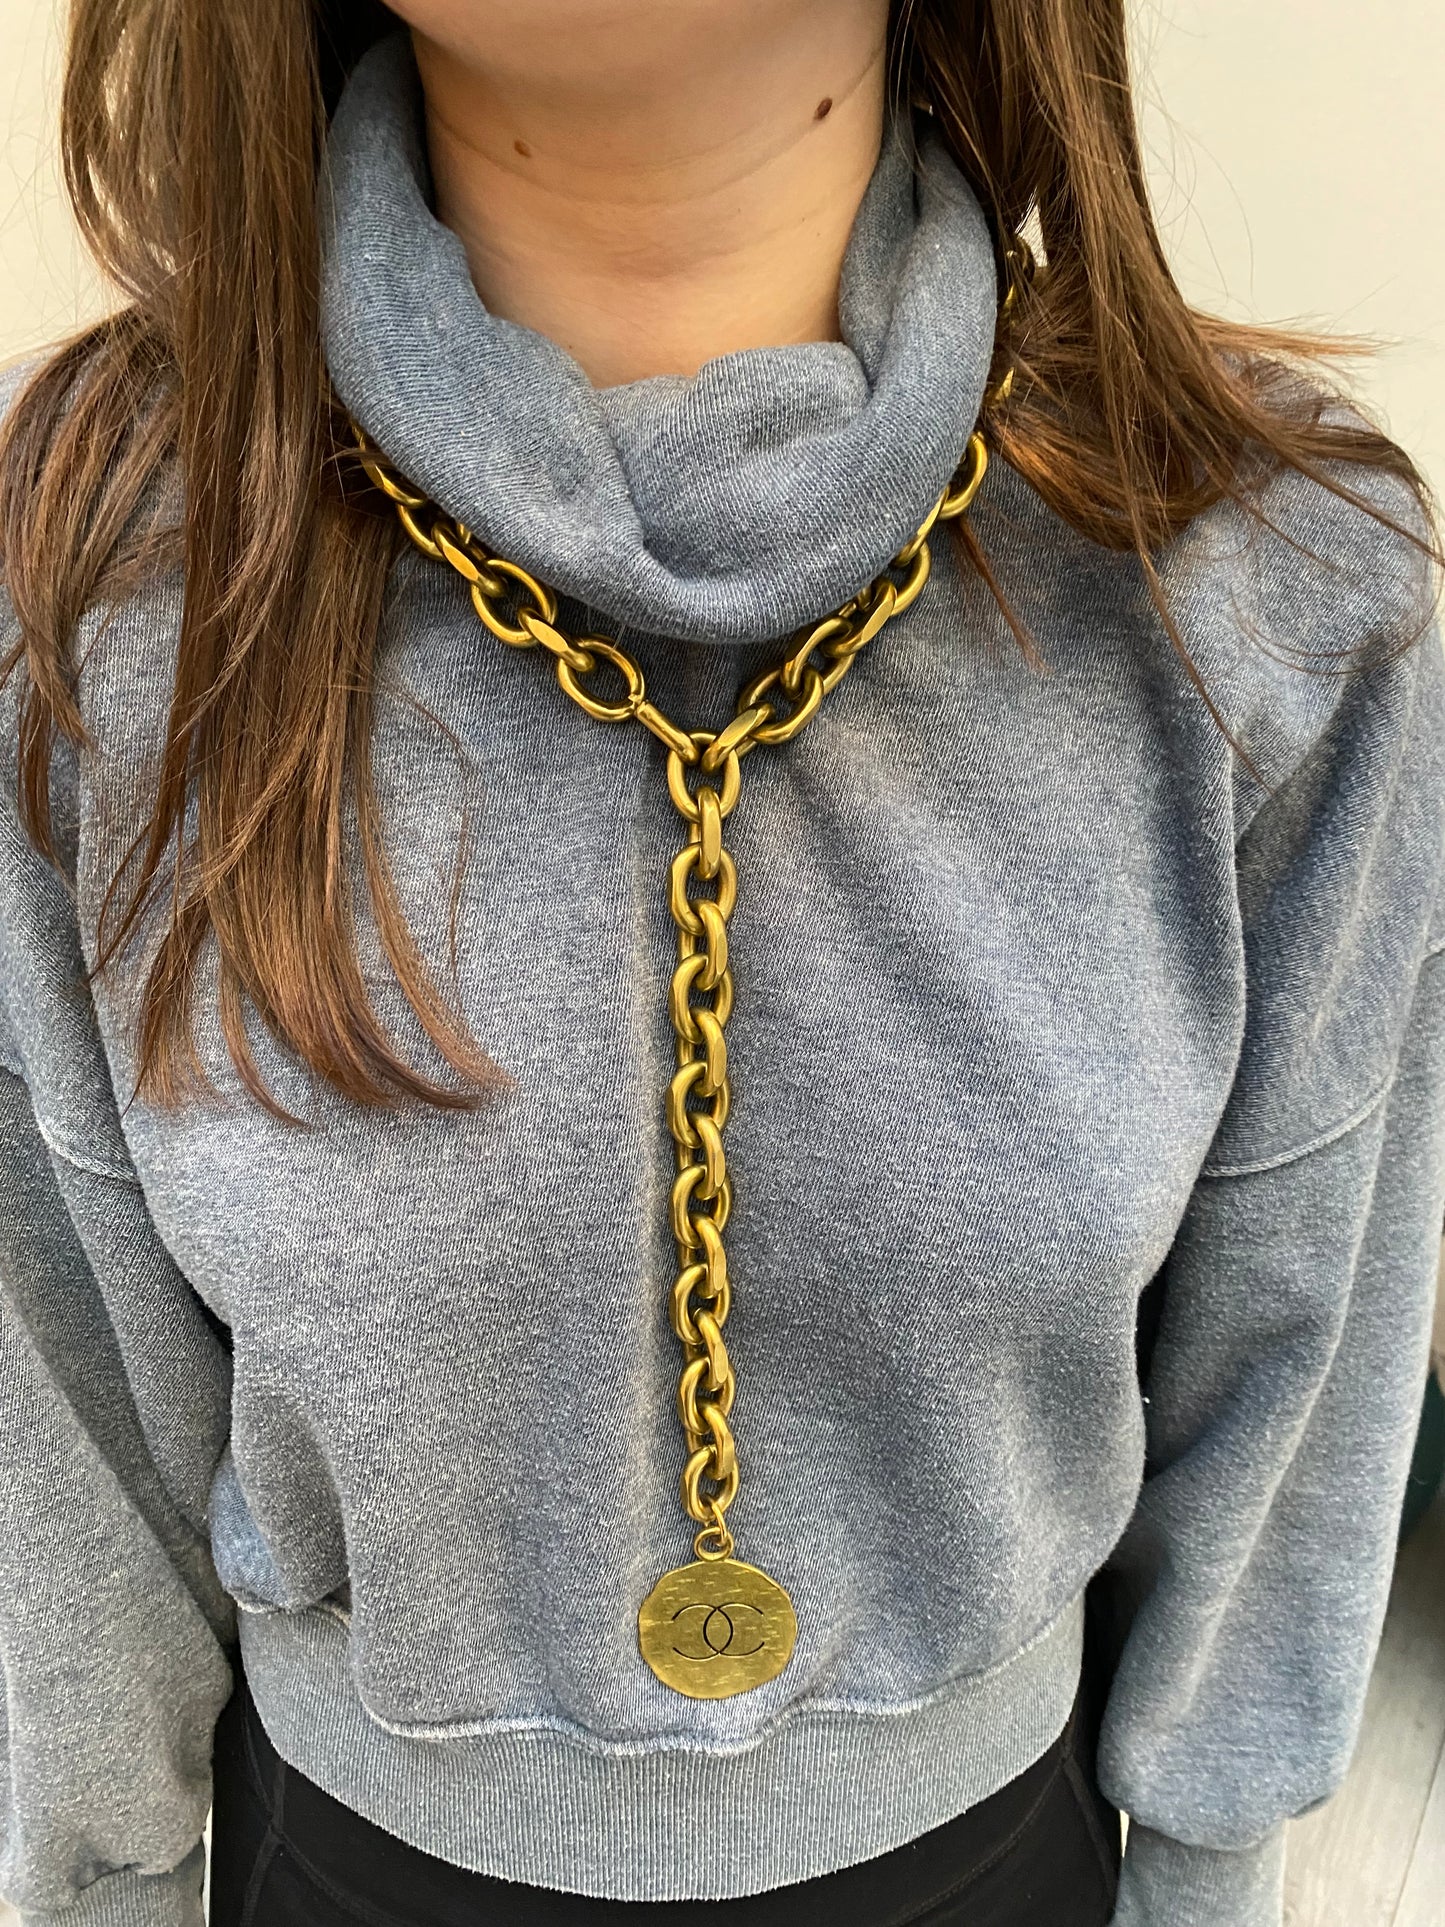 Chanel Gold Chain Belt/Necklace